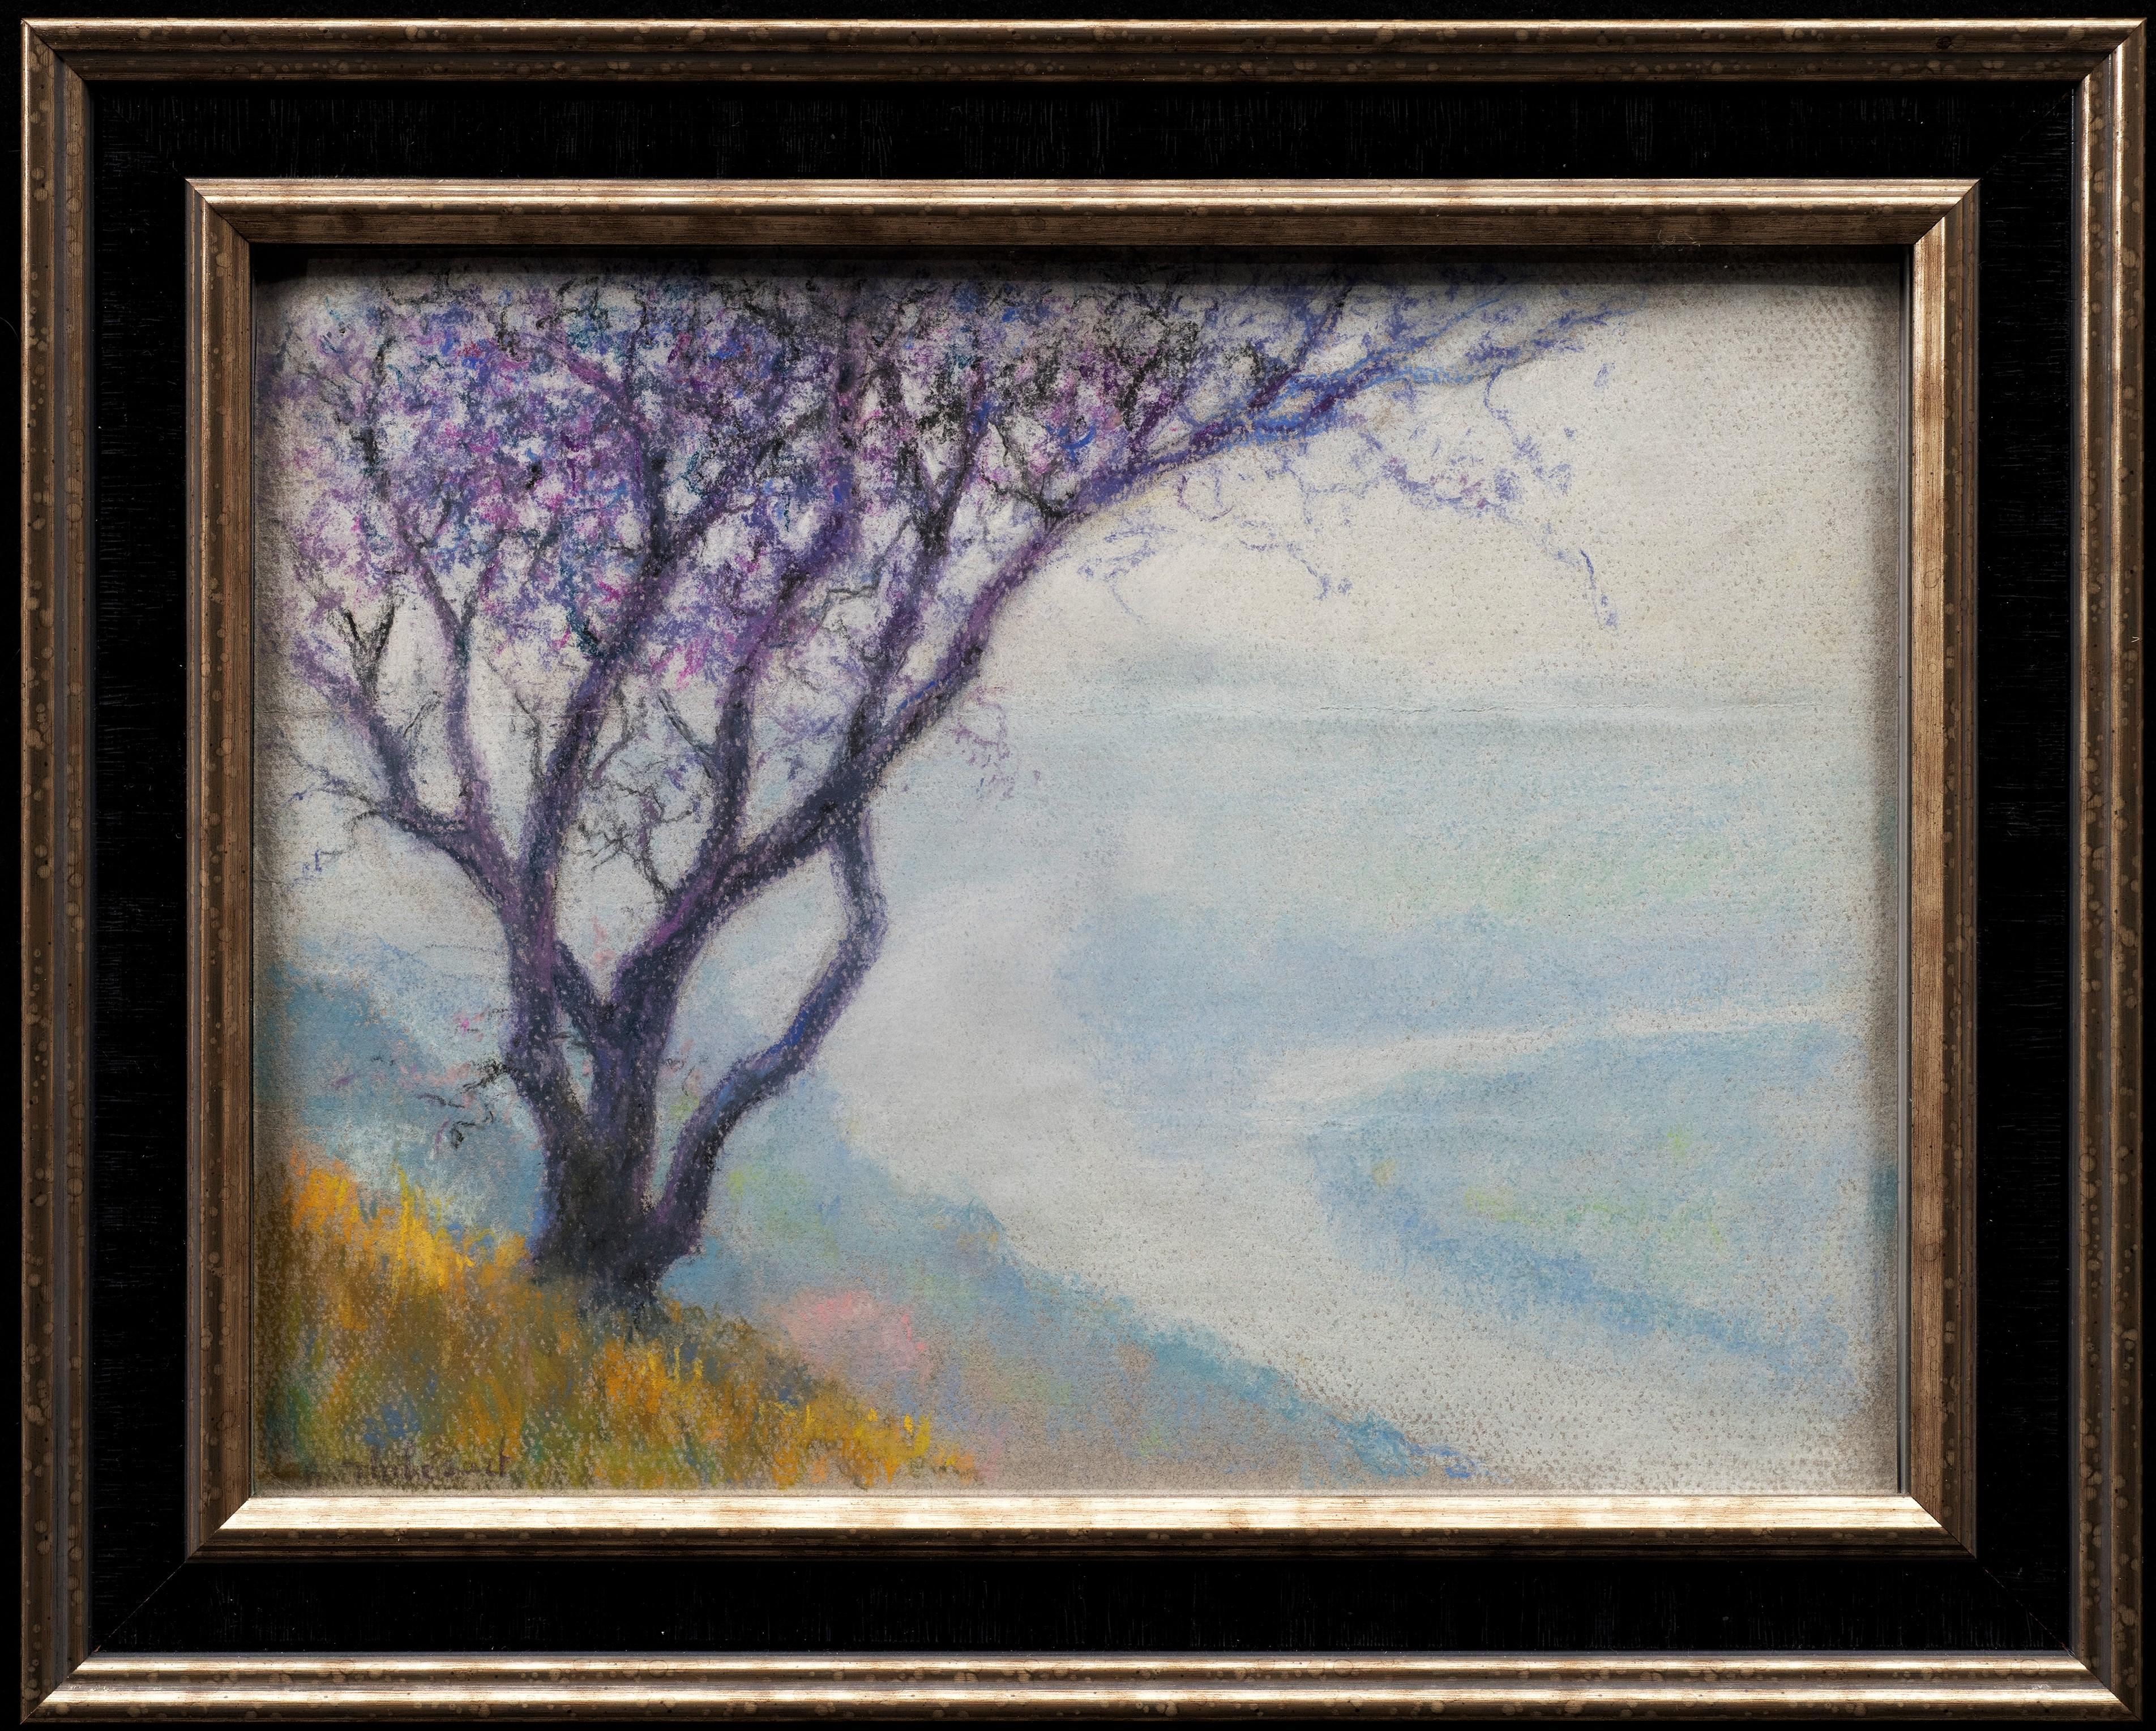 La Vallée de la Seine
Raymond Thibesart (France, 1874-1968)
Pastel on paper, 1939
Signed l.l.
12.5 x 9.5 (16 x 13 framed) inches
INV Nbr. 1939


This painting, among many Thibesarts we're currently featuring, is an astonishingly fine work of art and